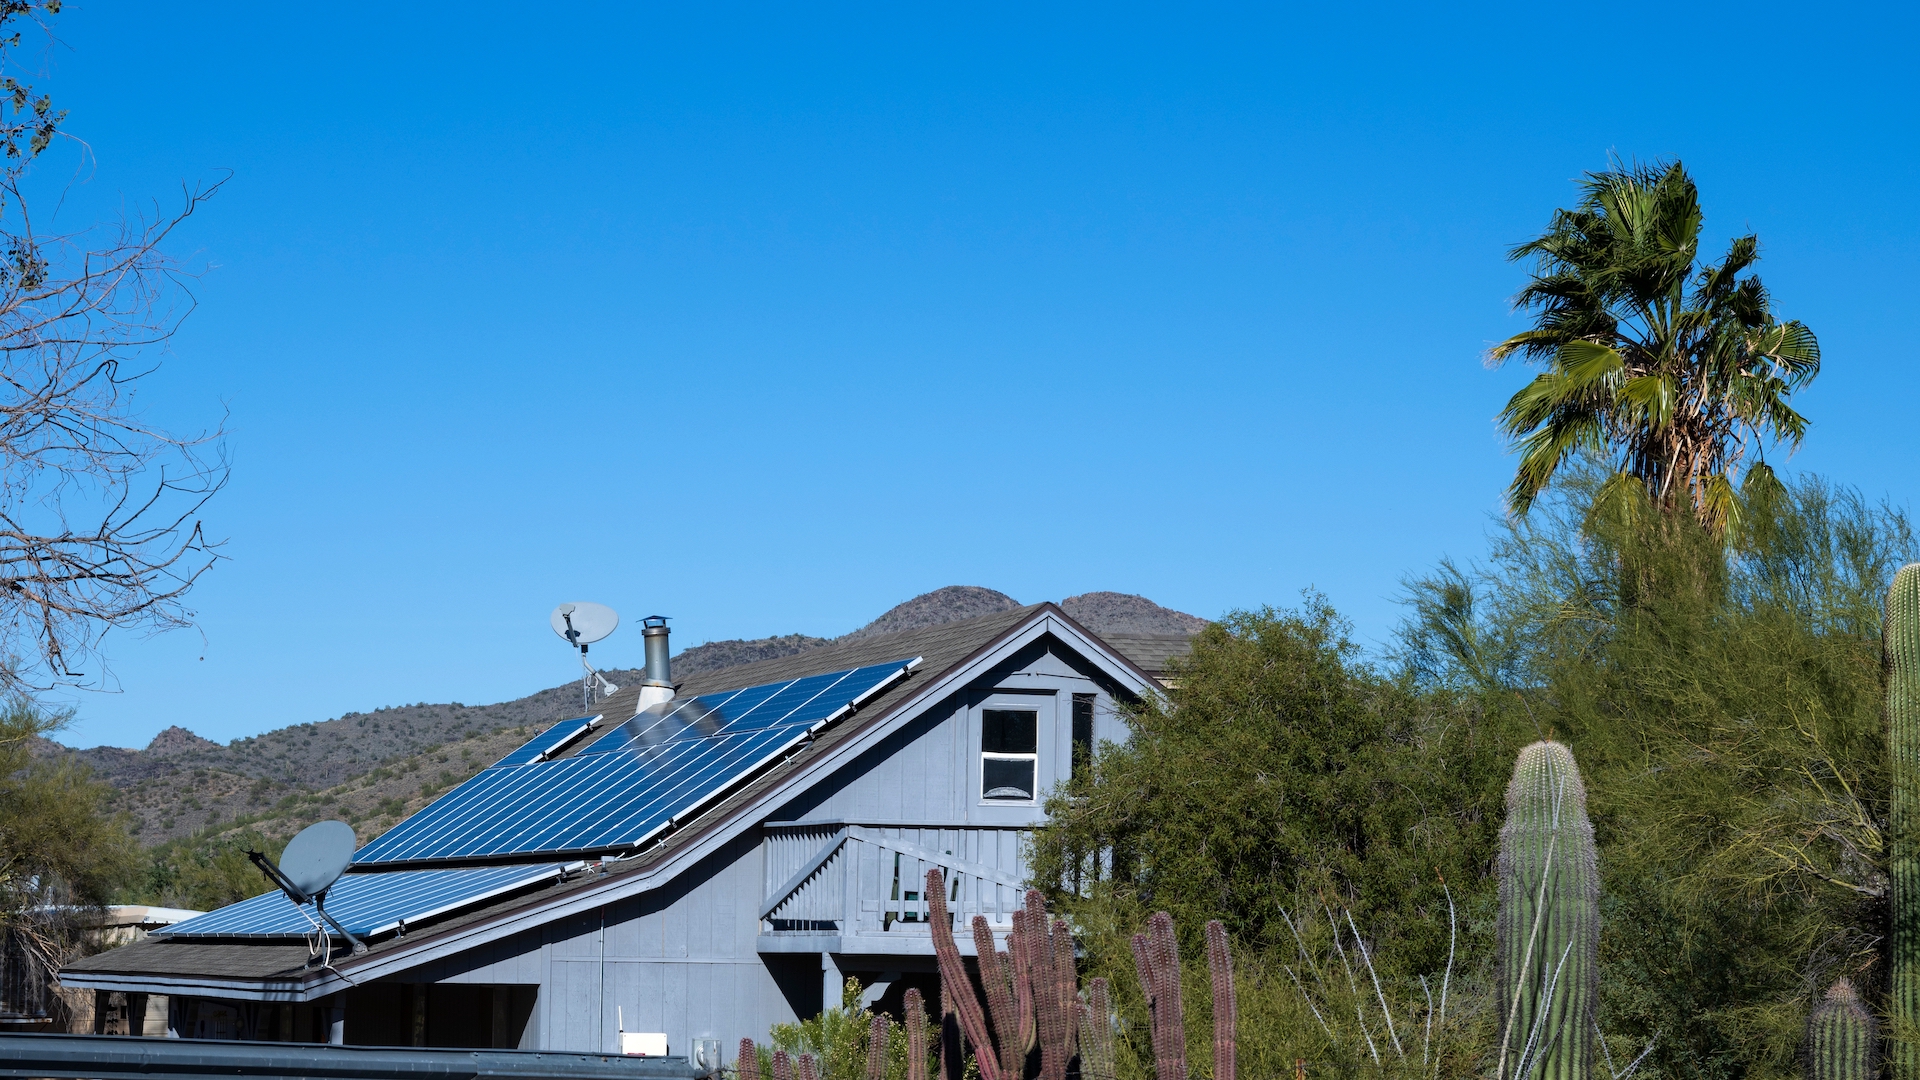 Solar panels on rooftop of blue home in Arizona with palm tree to the right and cacti in the foreground